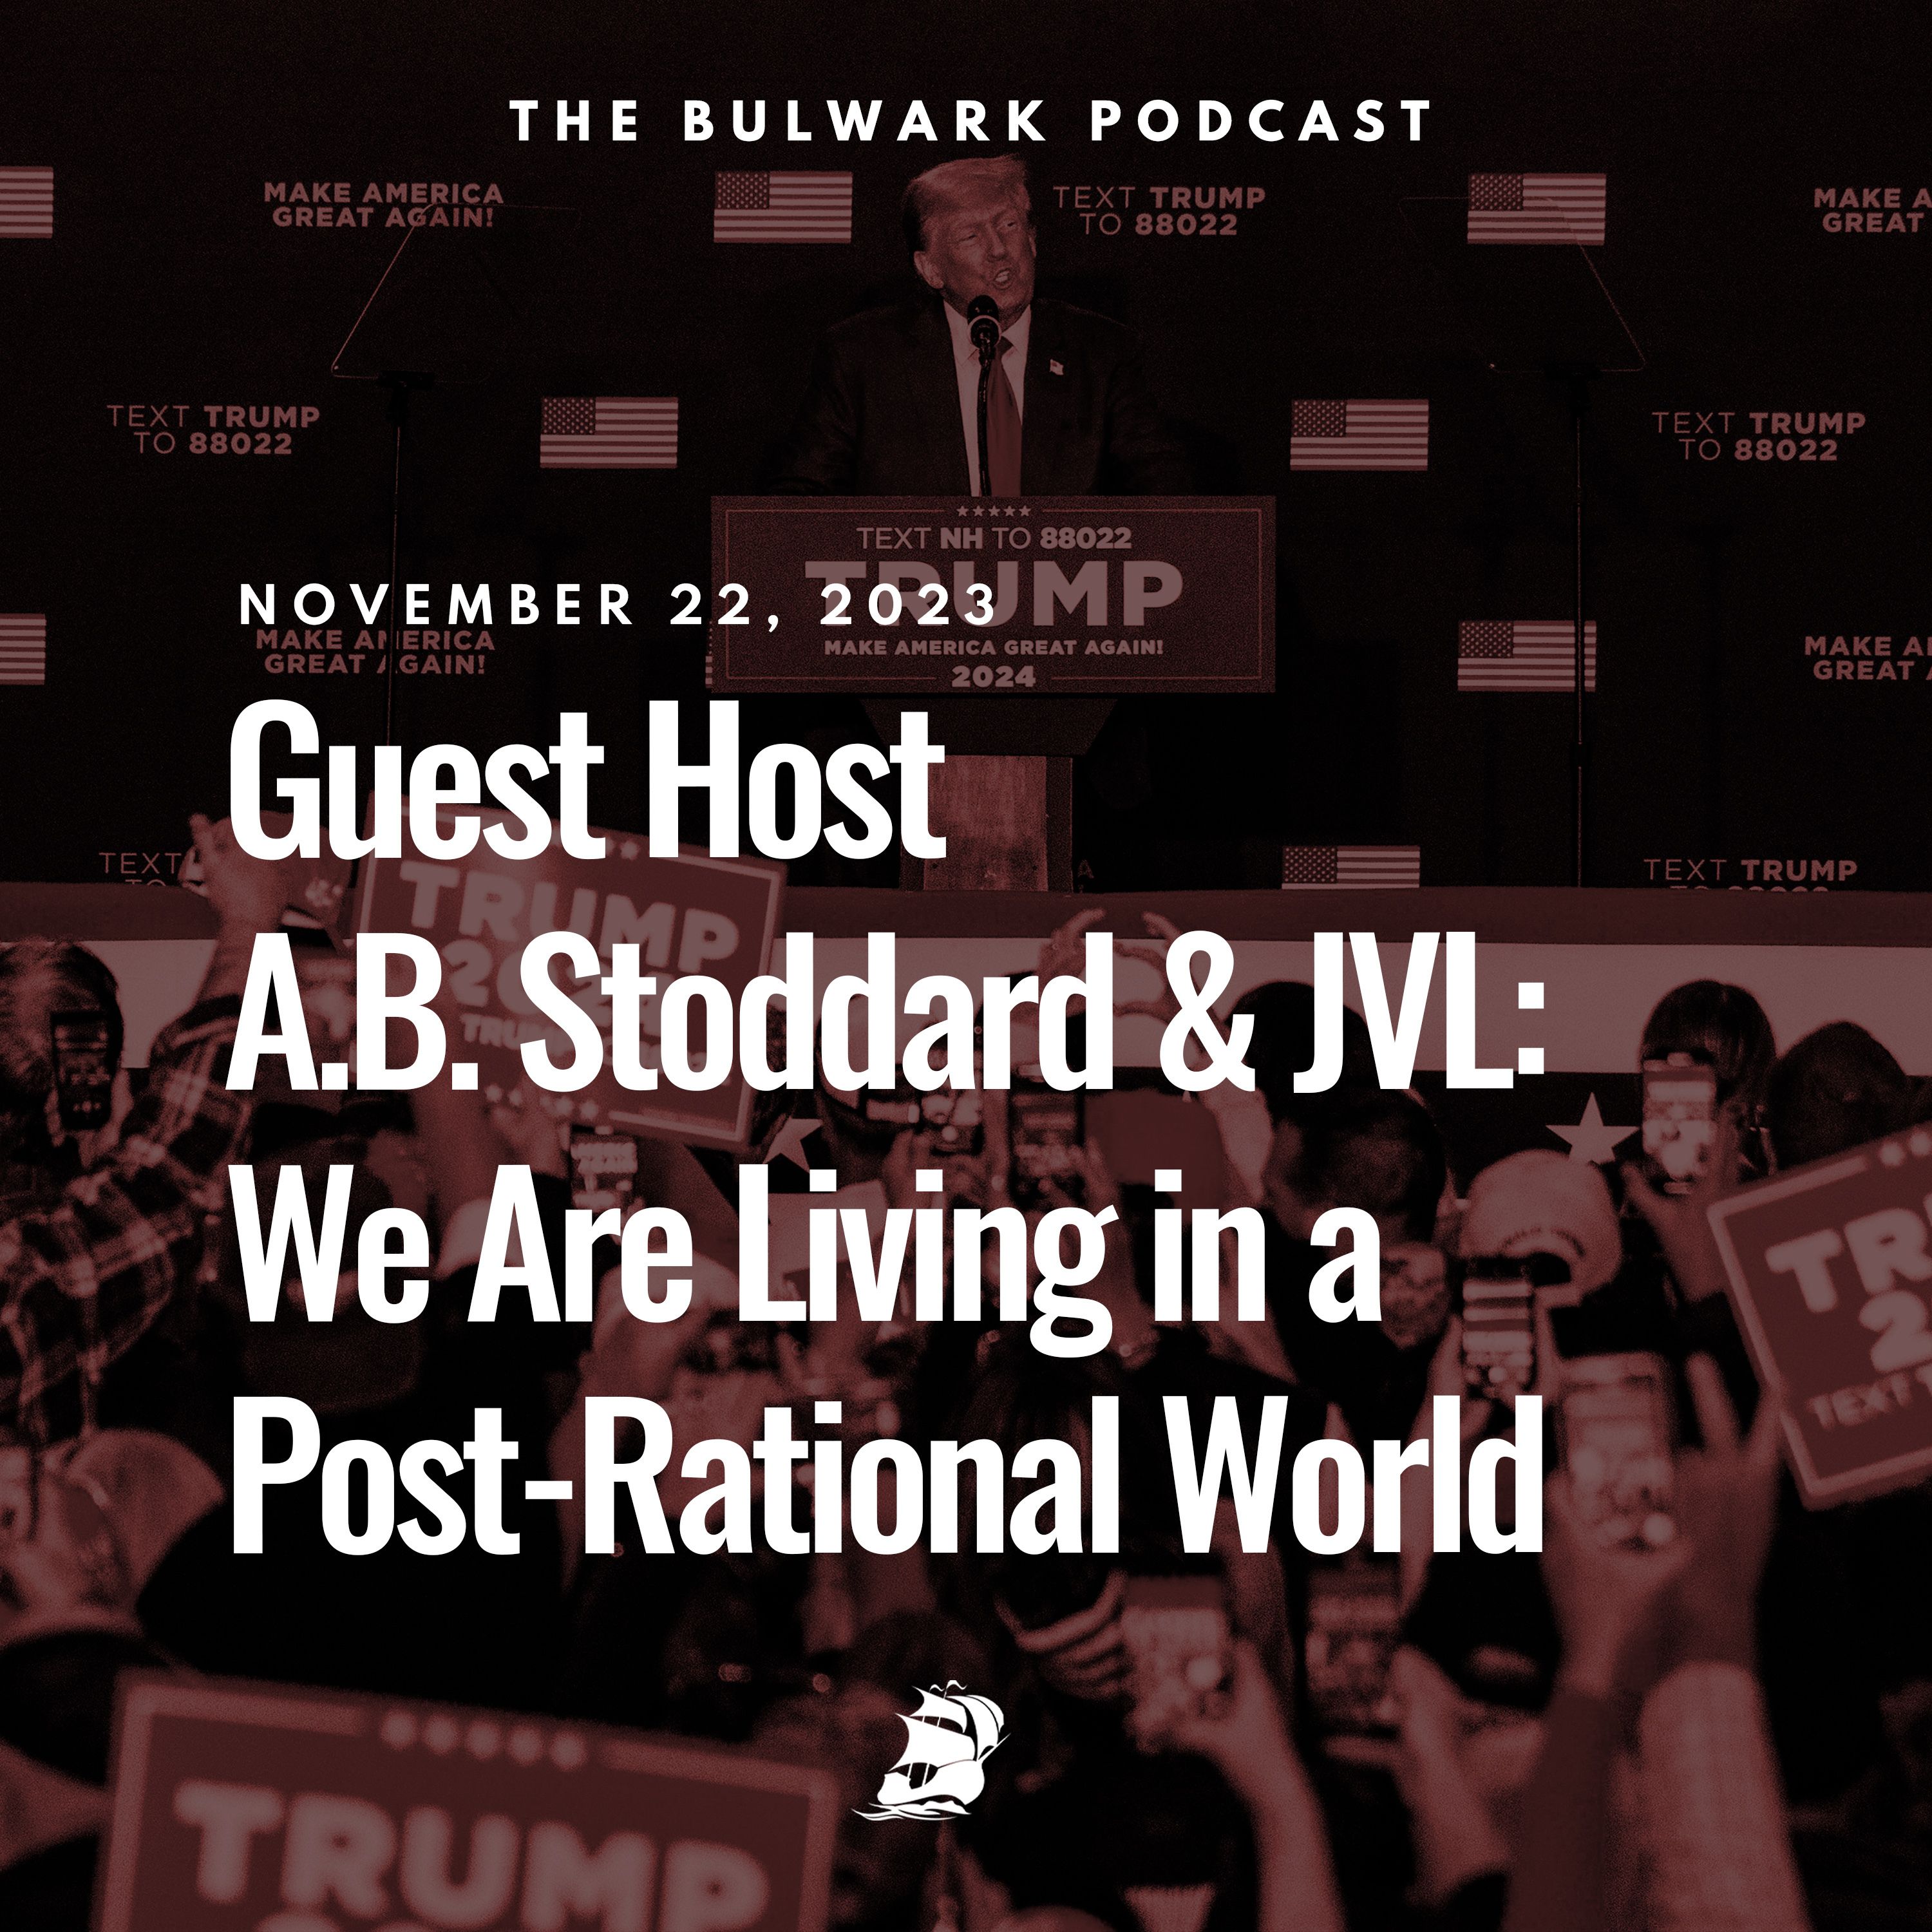 We Are Living in a Post-Rational World by The Bulwark Podcast